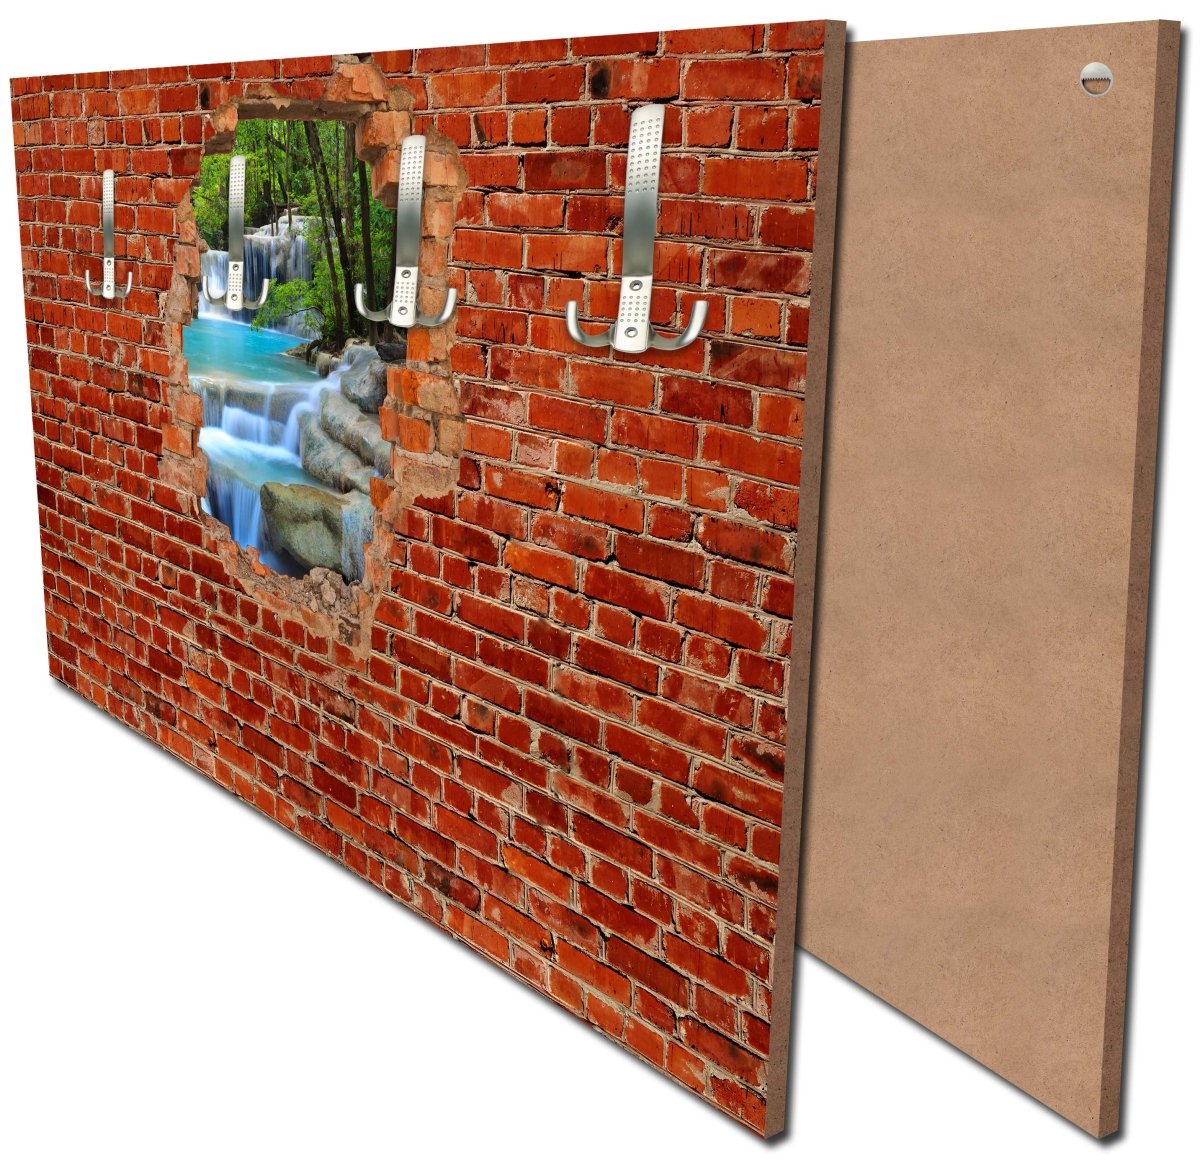 Wardrobe Waterfall in the Forest - Red Brick M0618